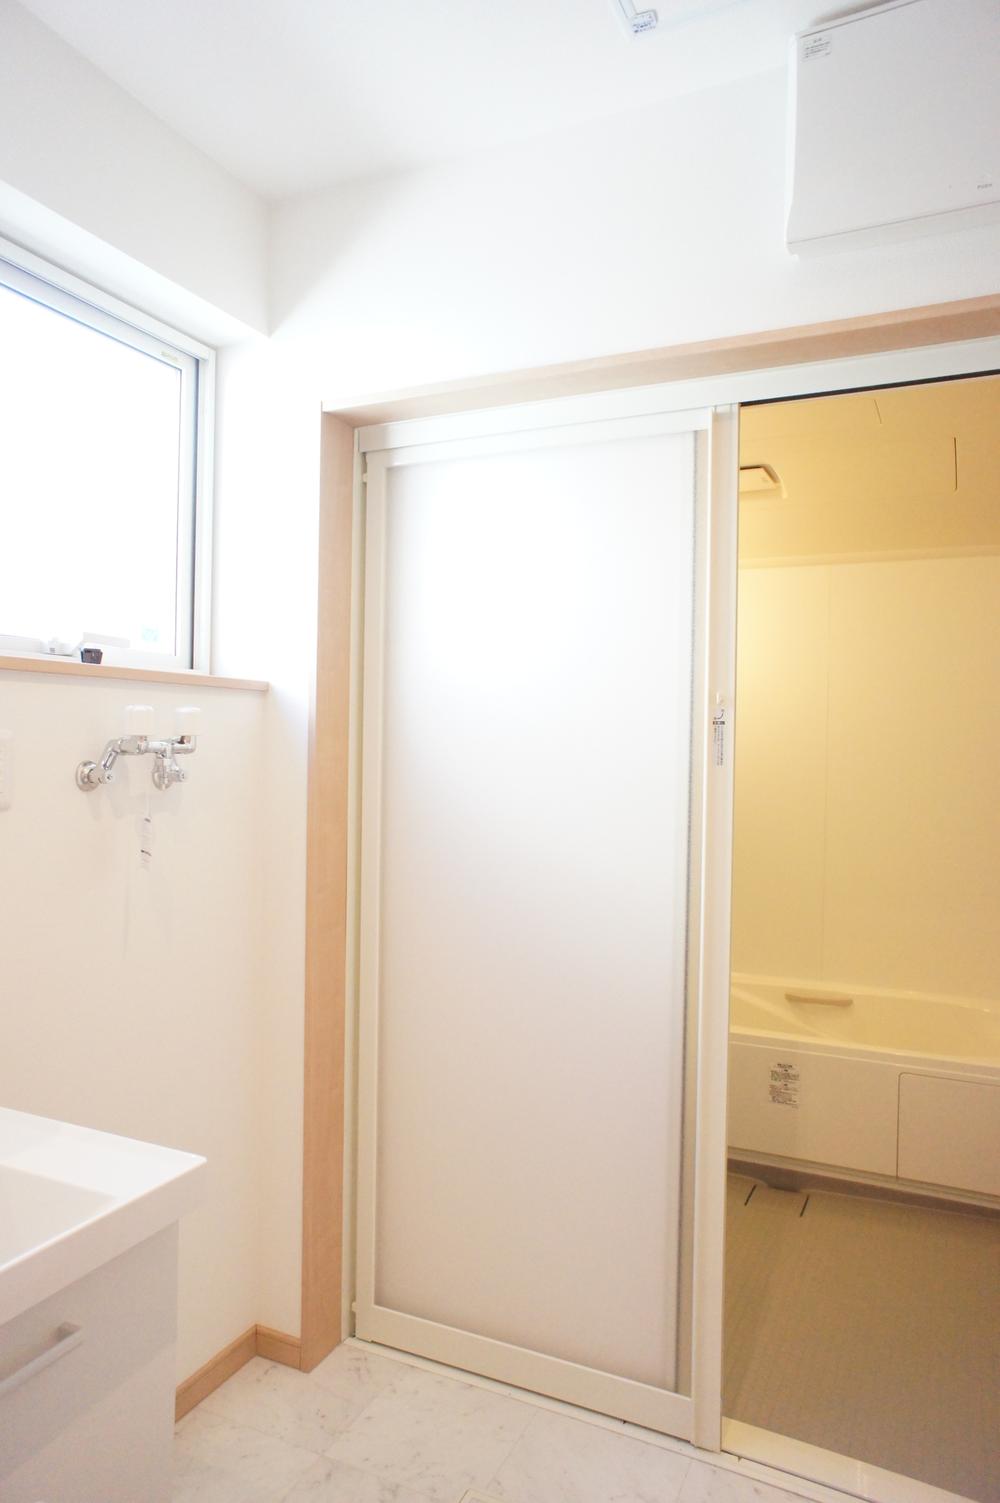 Other Equipment. The bathroom is set up a door of sliding. Design of safe and secure with a barrier-free